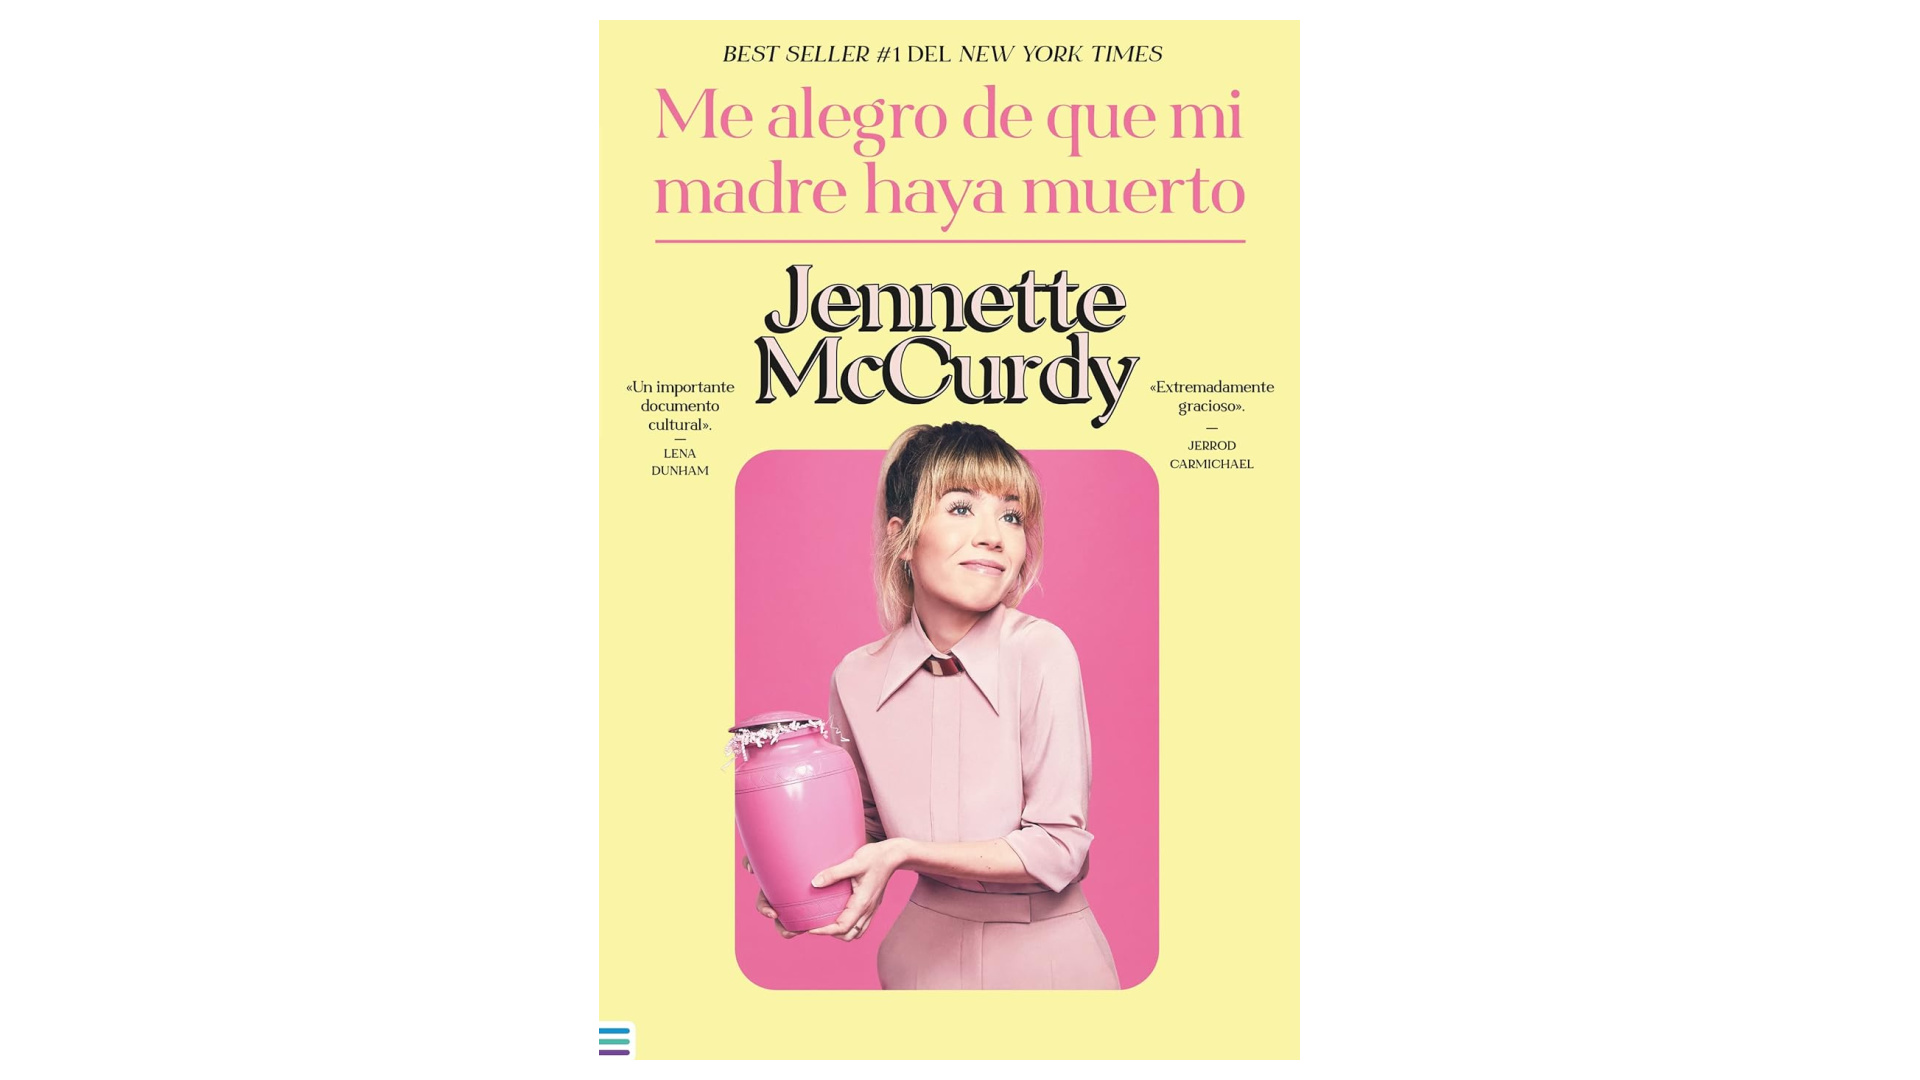 The Story of Jennette McCurdy